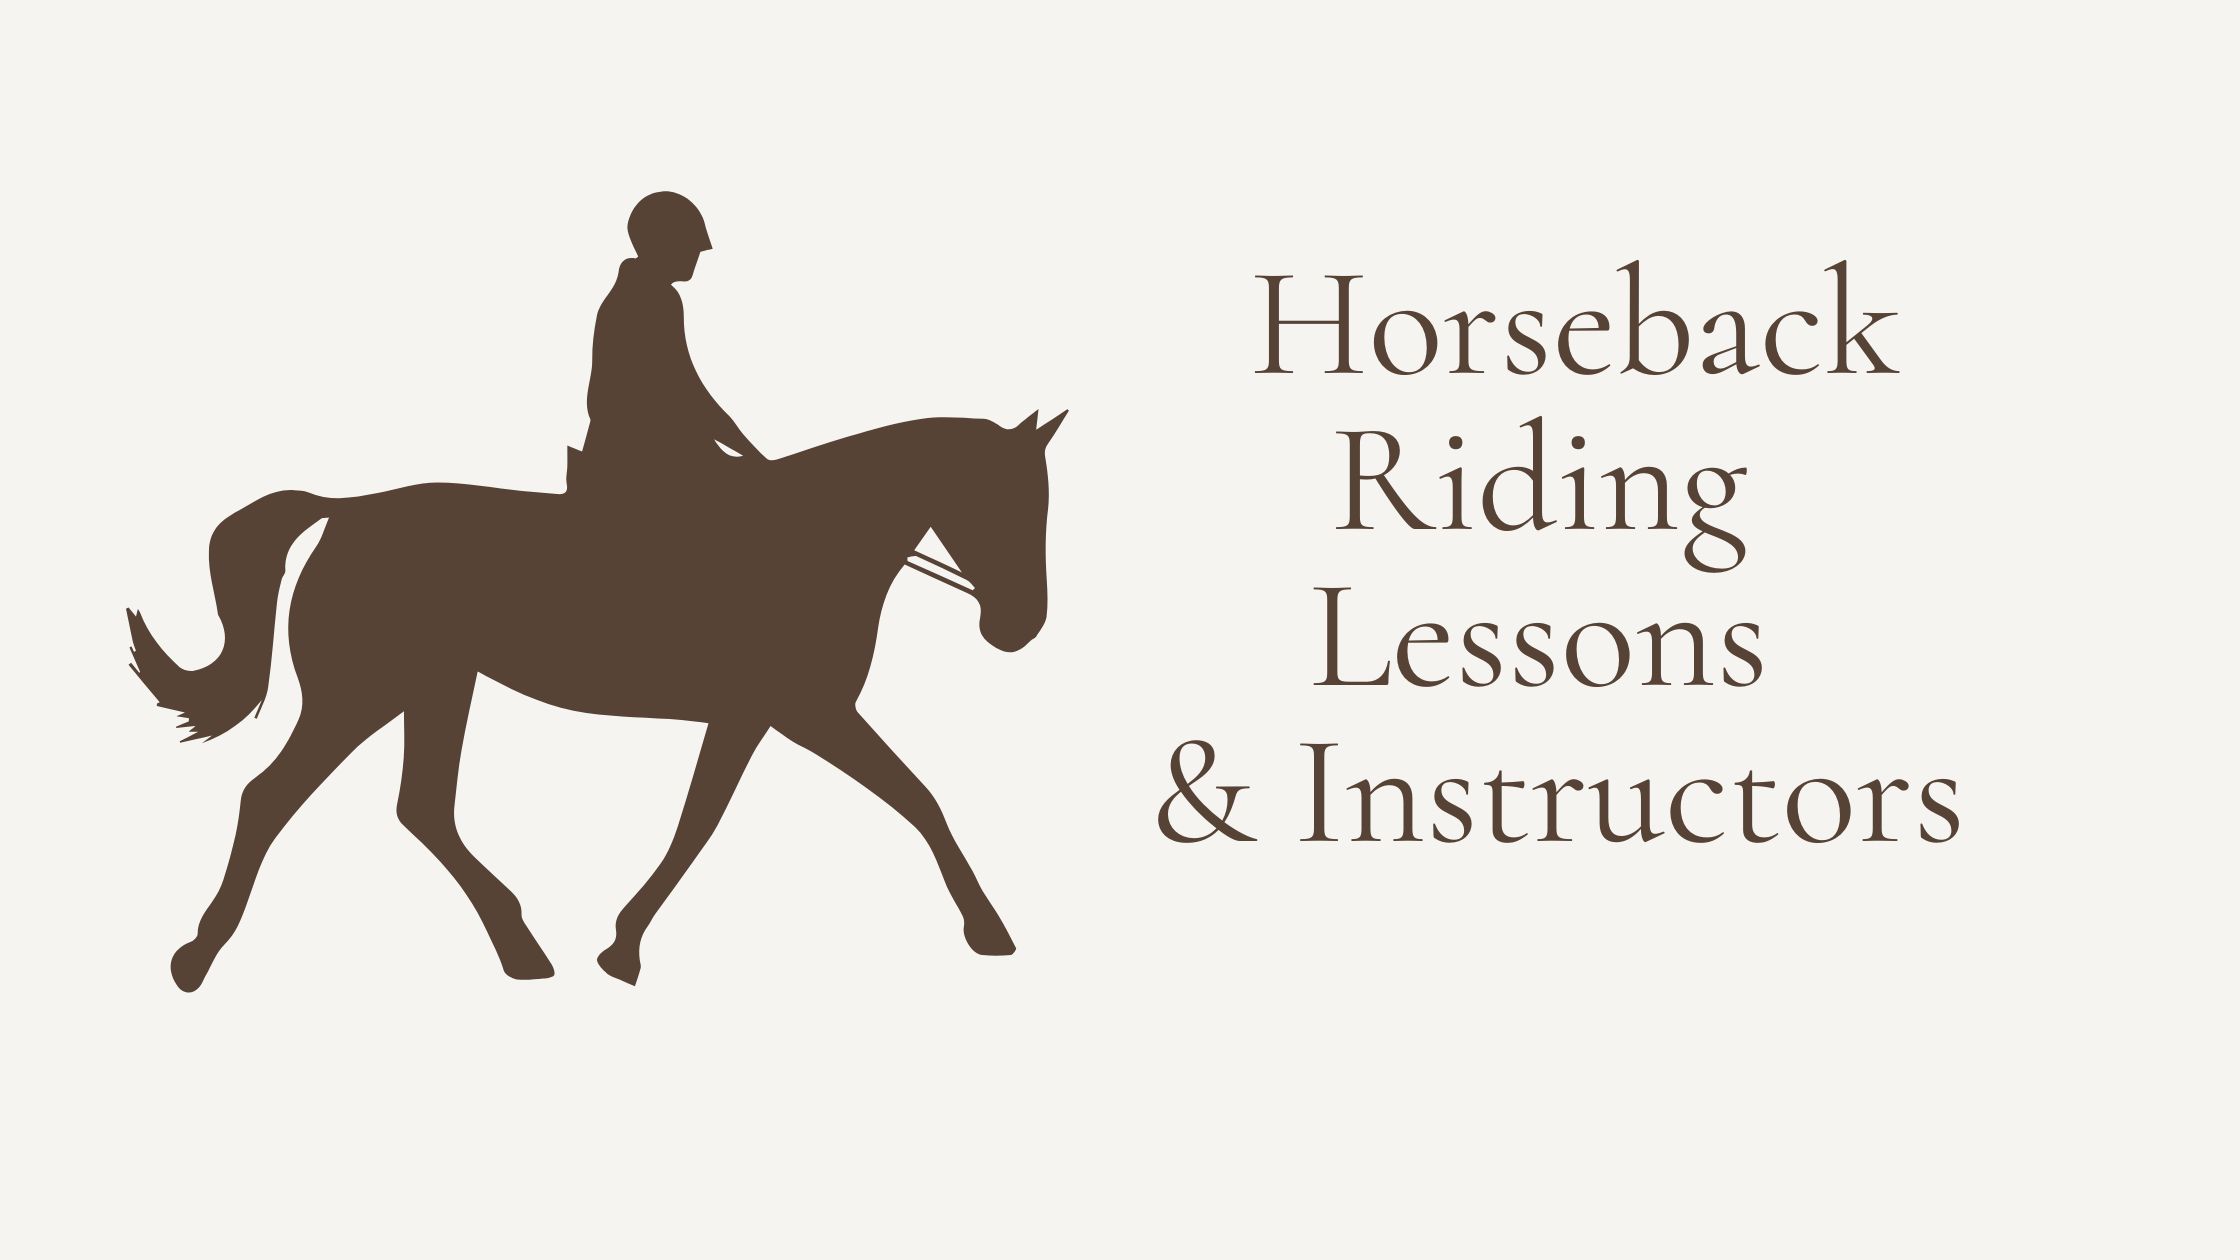 Horseback Riding Lessons & Instructors in Chattanooga Cover Image